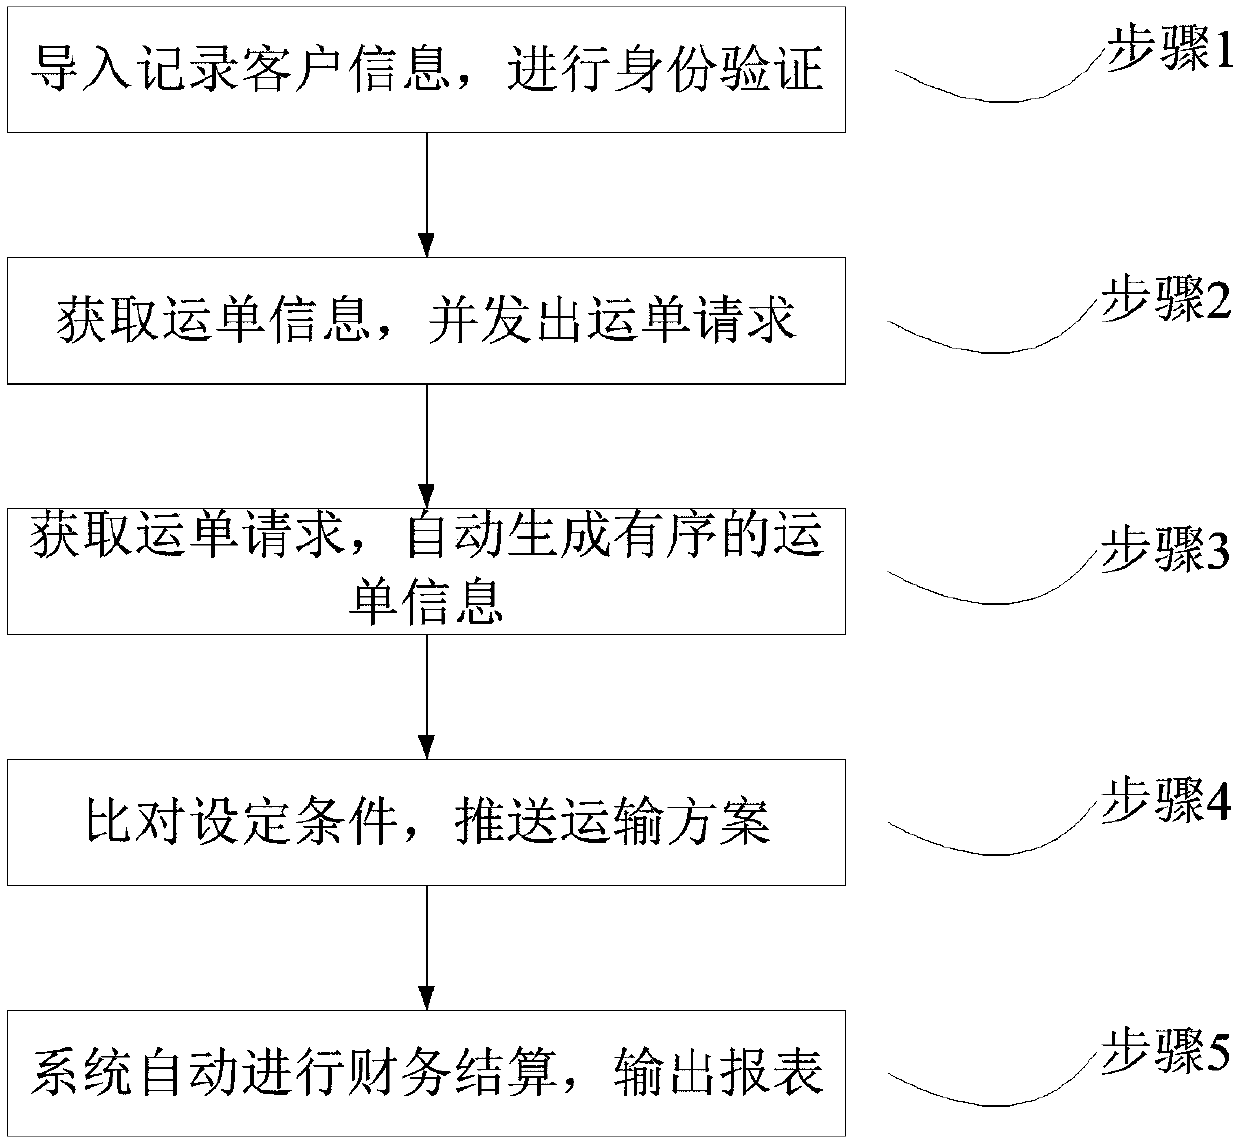 Operation system and order generation method for fast logistics informatization